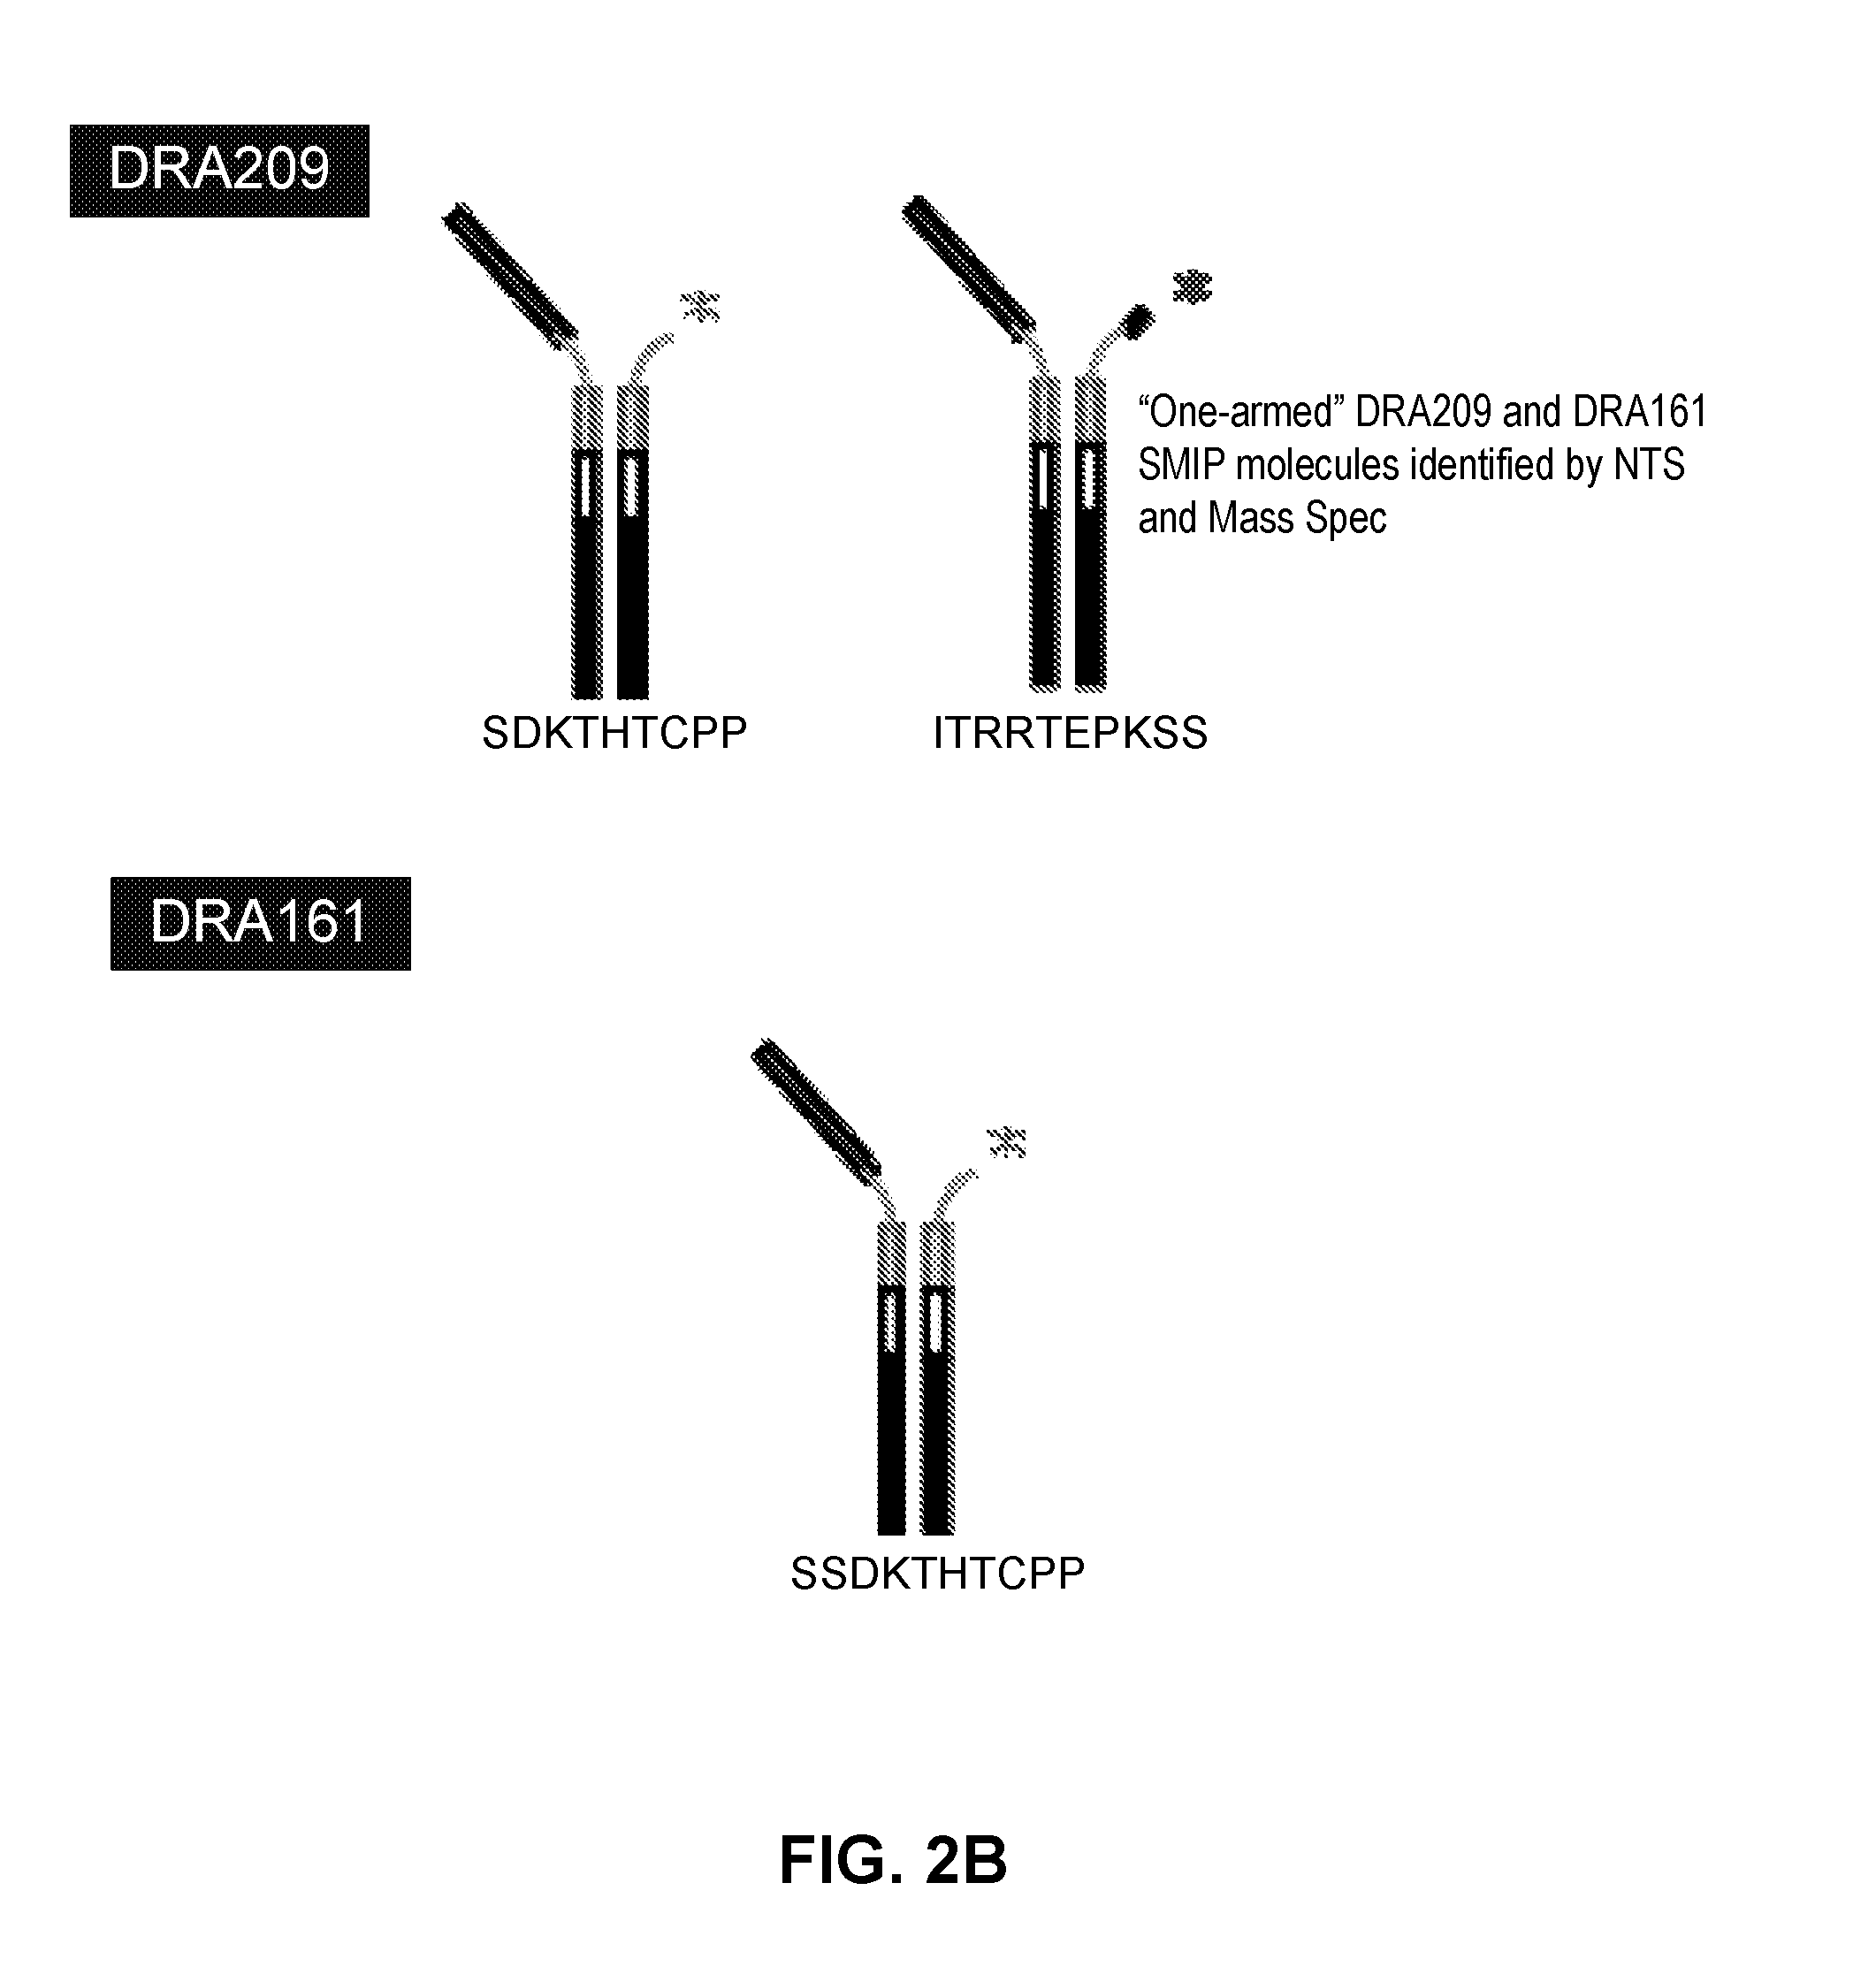 Cd3 binding polypeptides